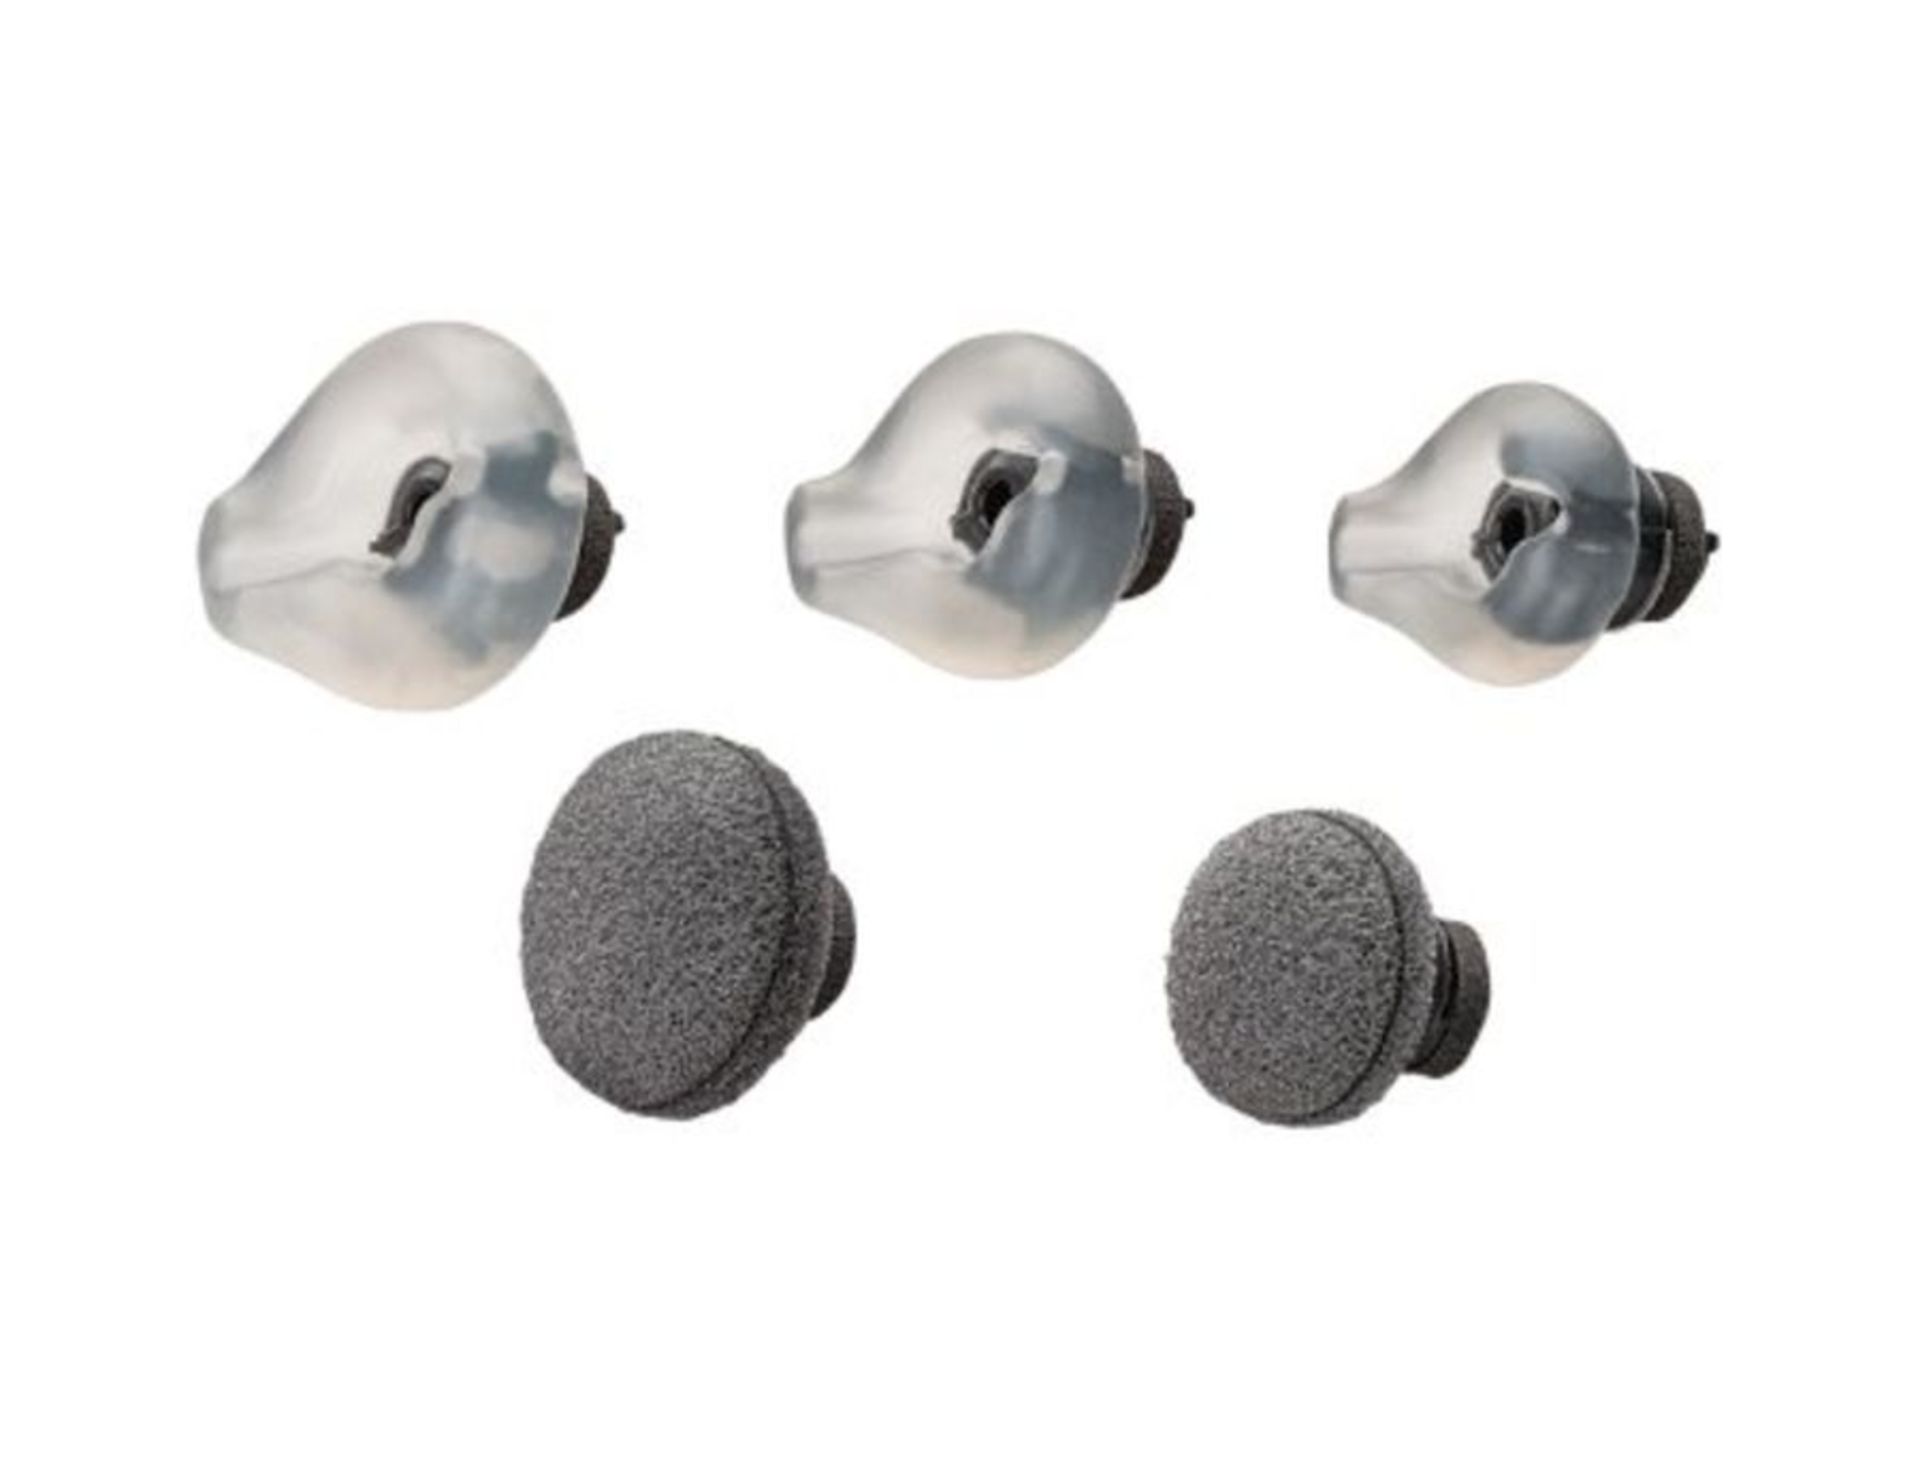 Plantronics 66935-05 Eartip Kit for CS70 Wireless Headsets (3 Gel and 3 Foam Tips)